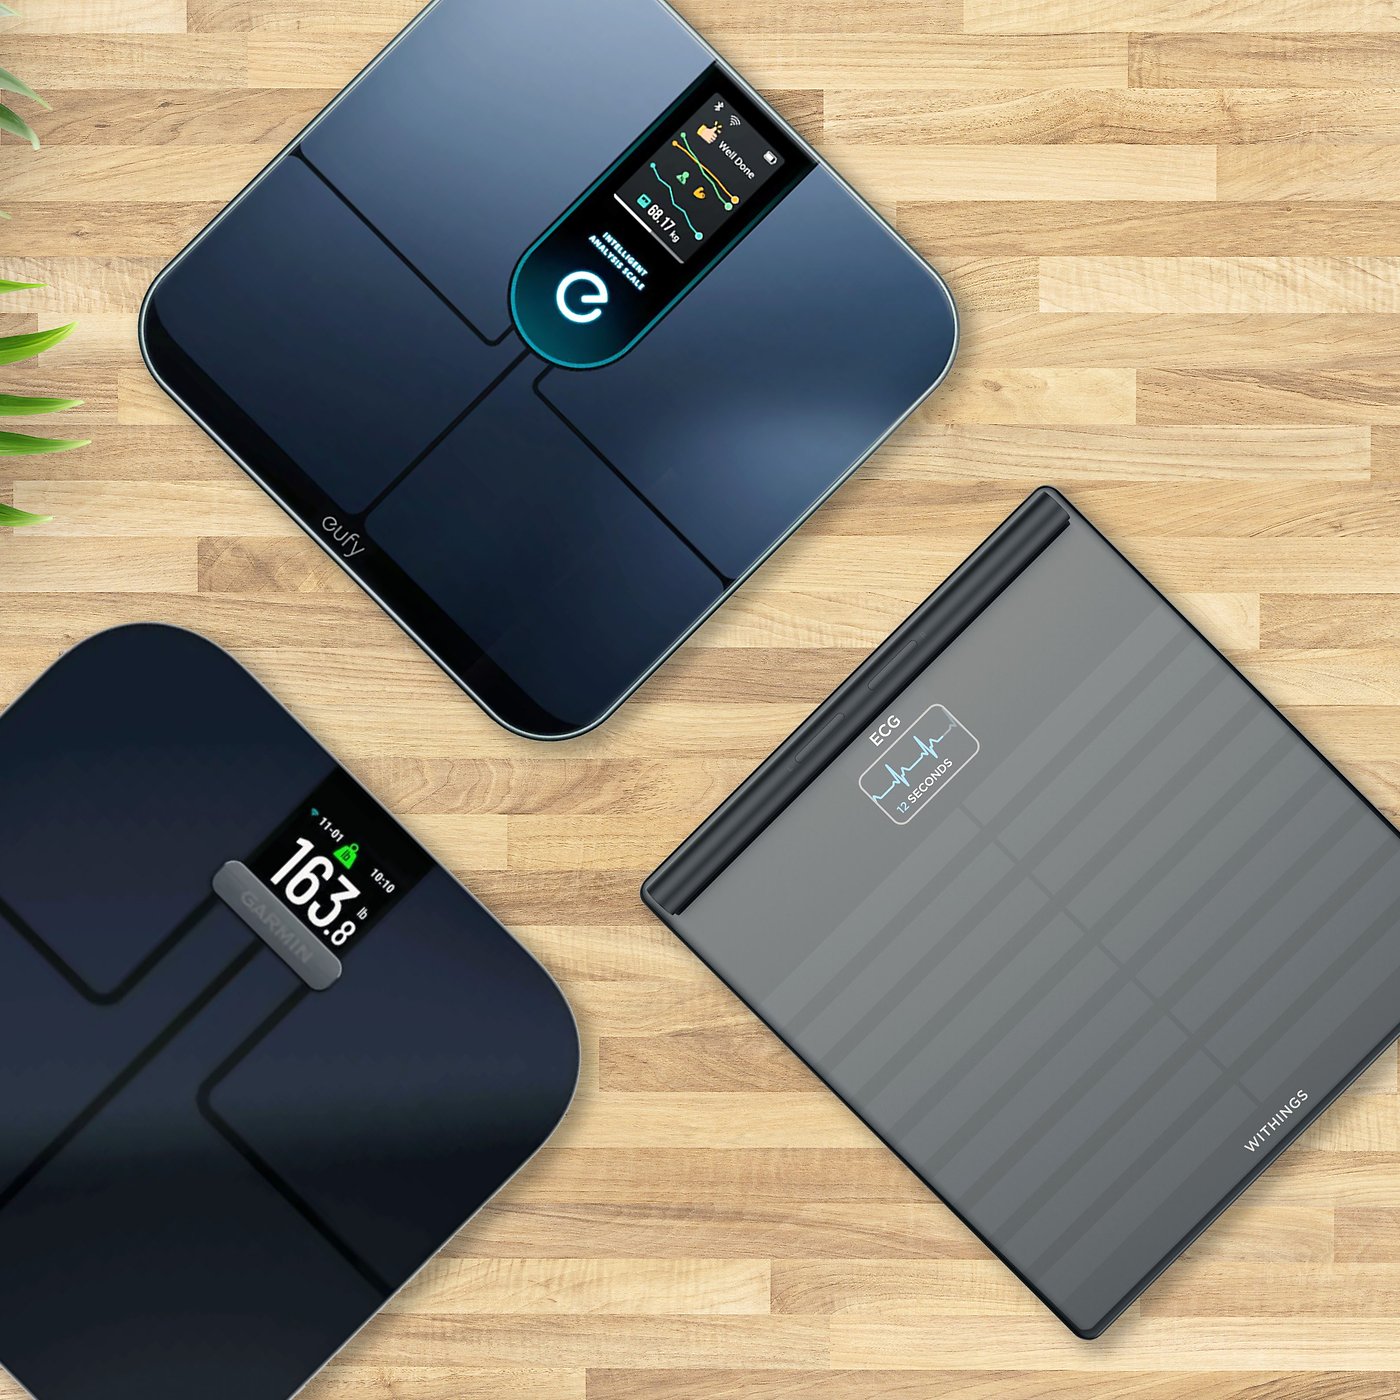 Withings Body Scan - Connected Health Station Smart Scale - Apple (UK)